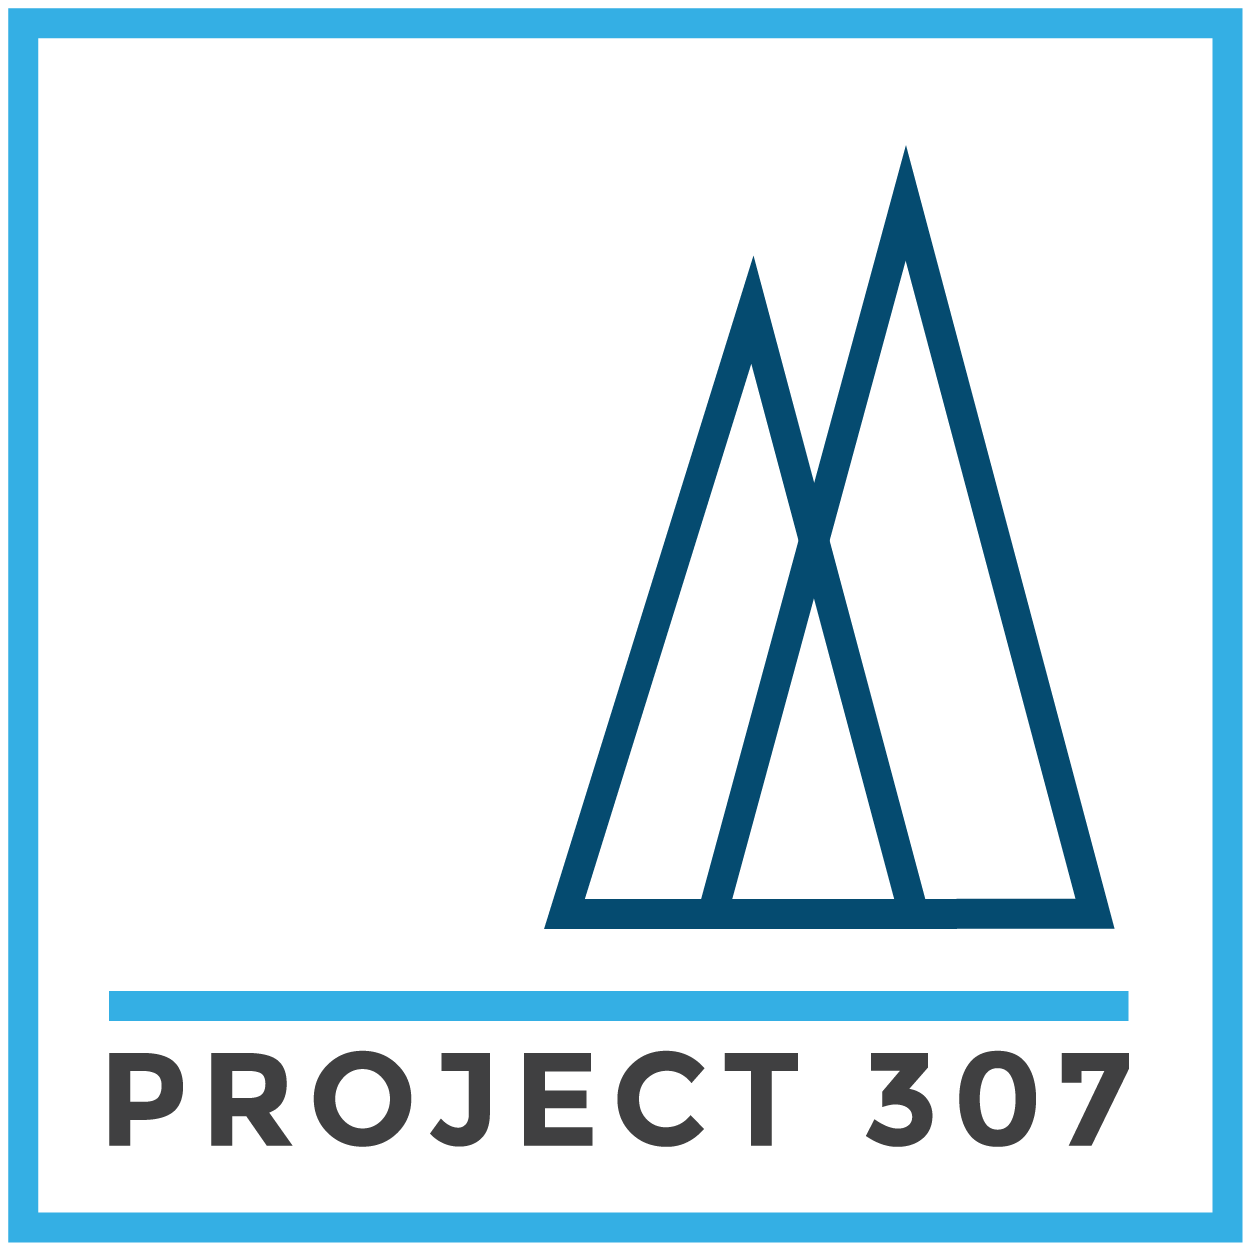 Project 307